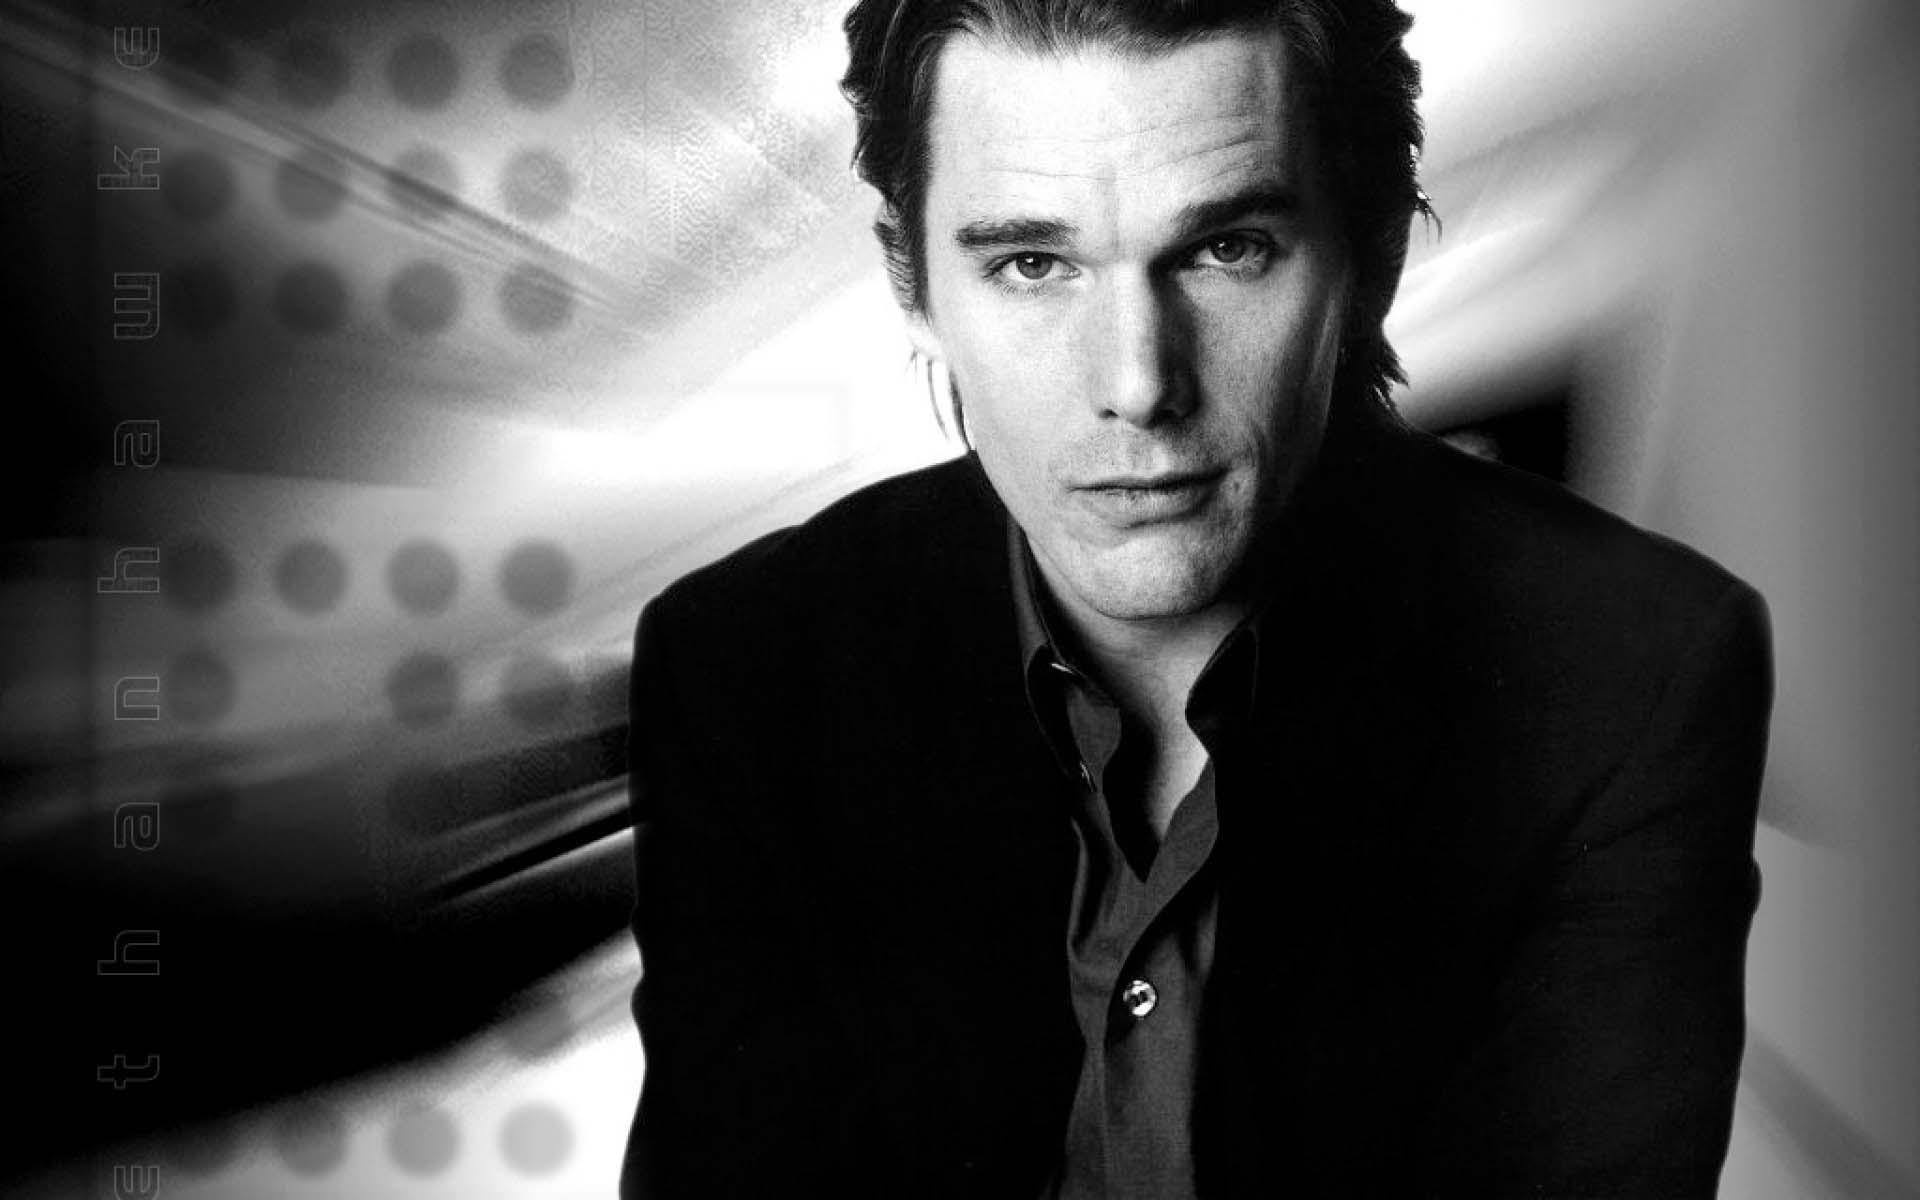 Ethan Hawke Wallpapers and Background Images stmednet